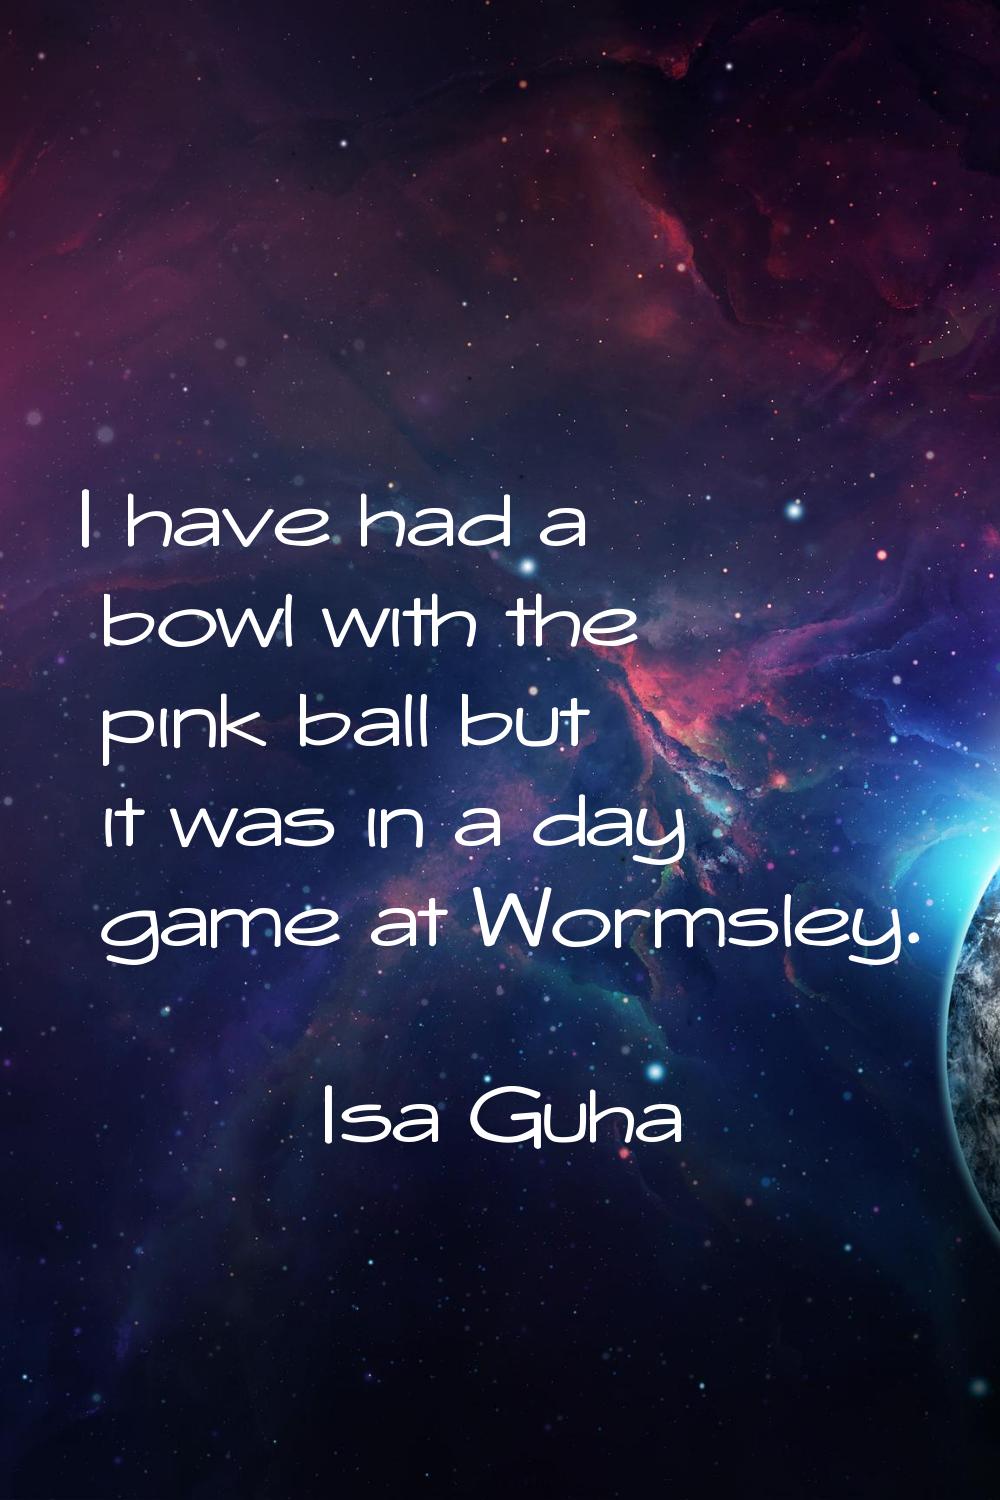 I have had a bowl with the pink ball but it was in a day game at Wormsley.